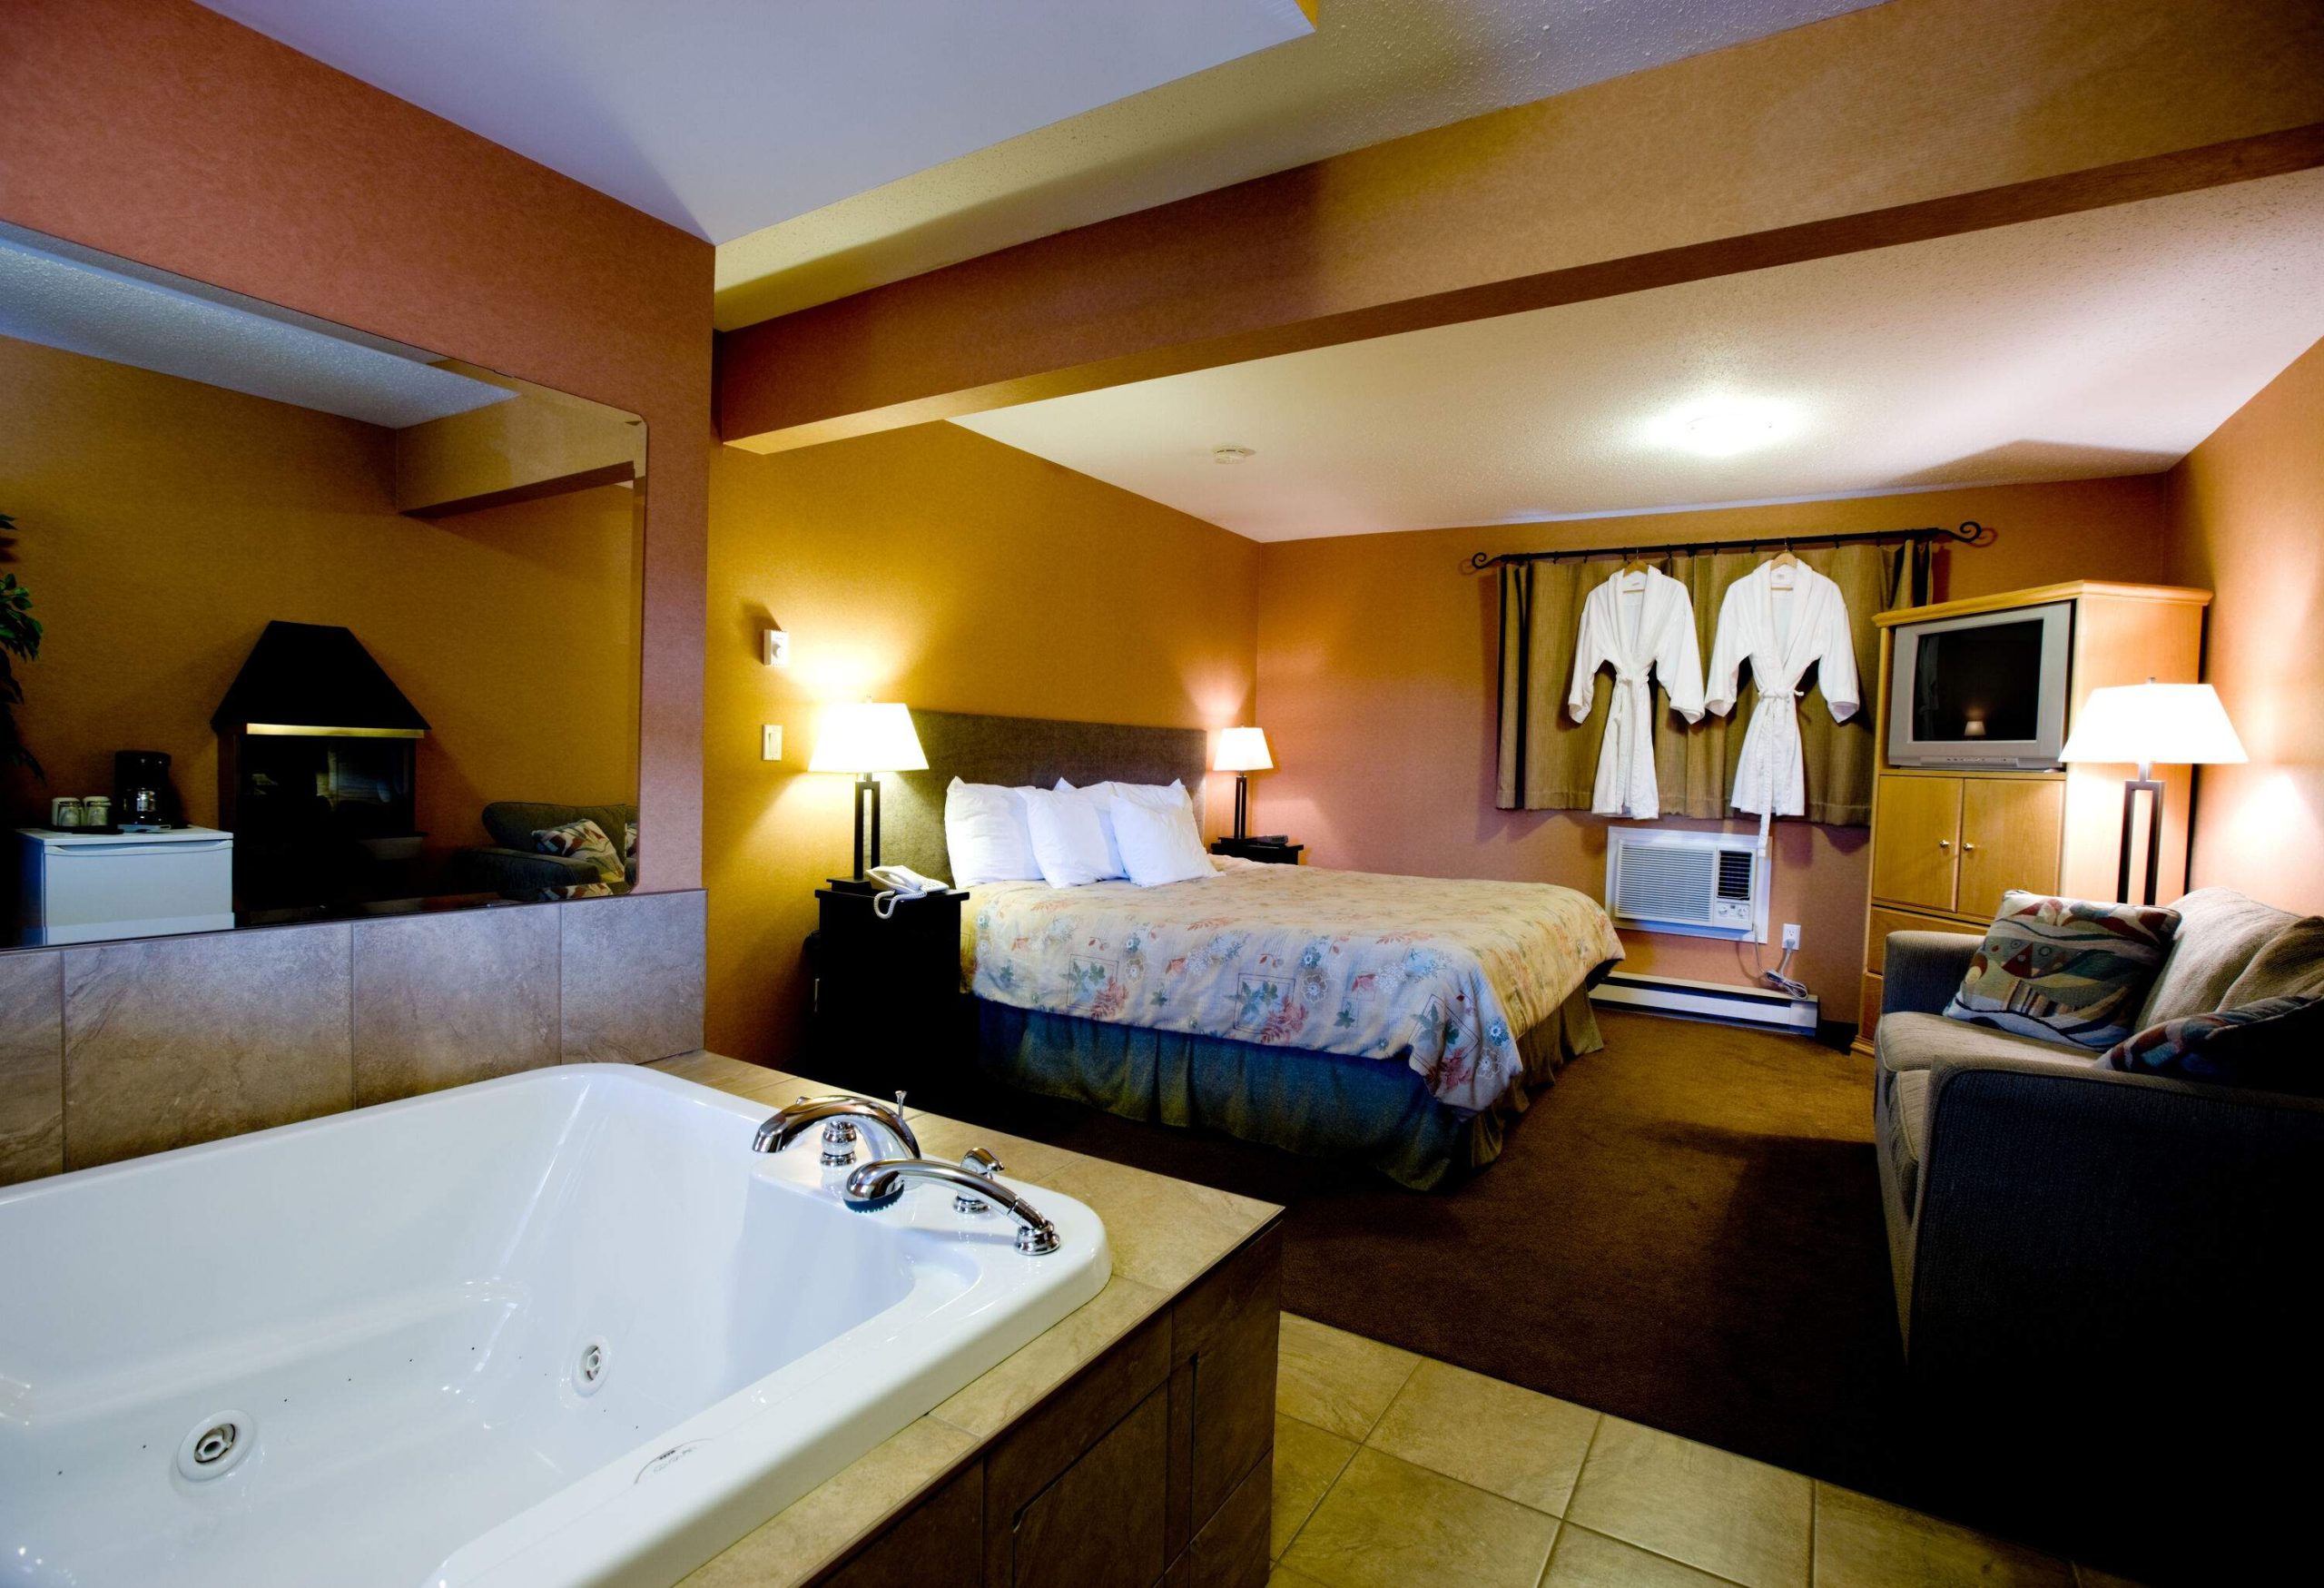 A hotel room with a cosy bed, a sofa and a jacuzzi with two bathrobes hanging on the window curtain.